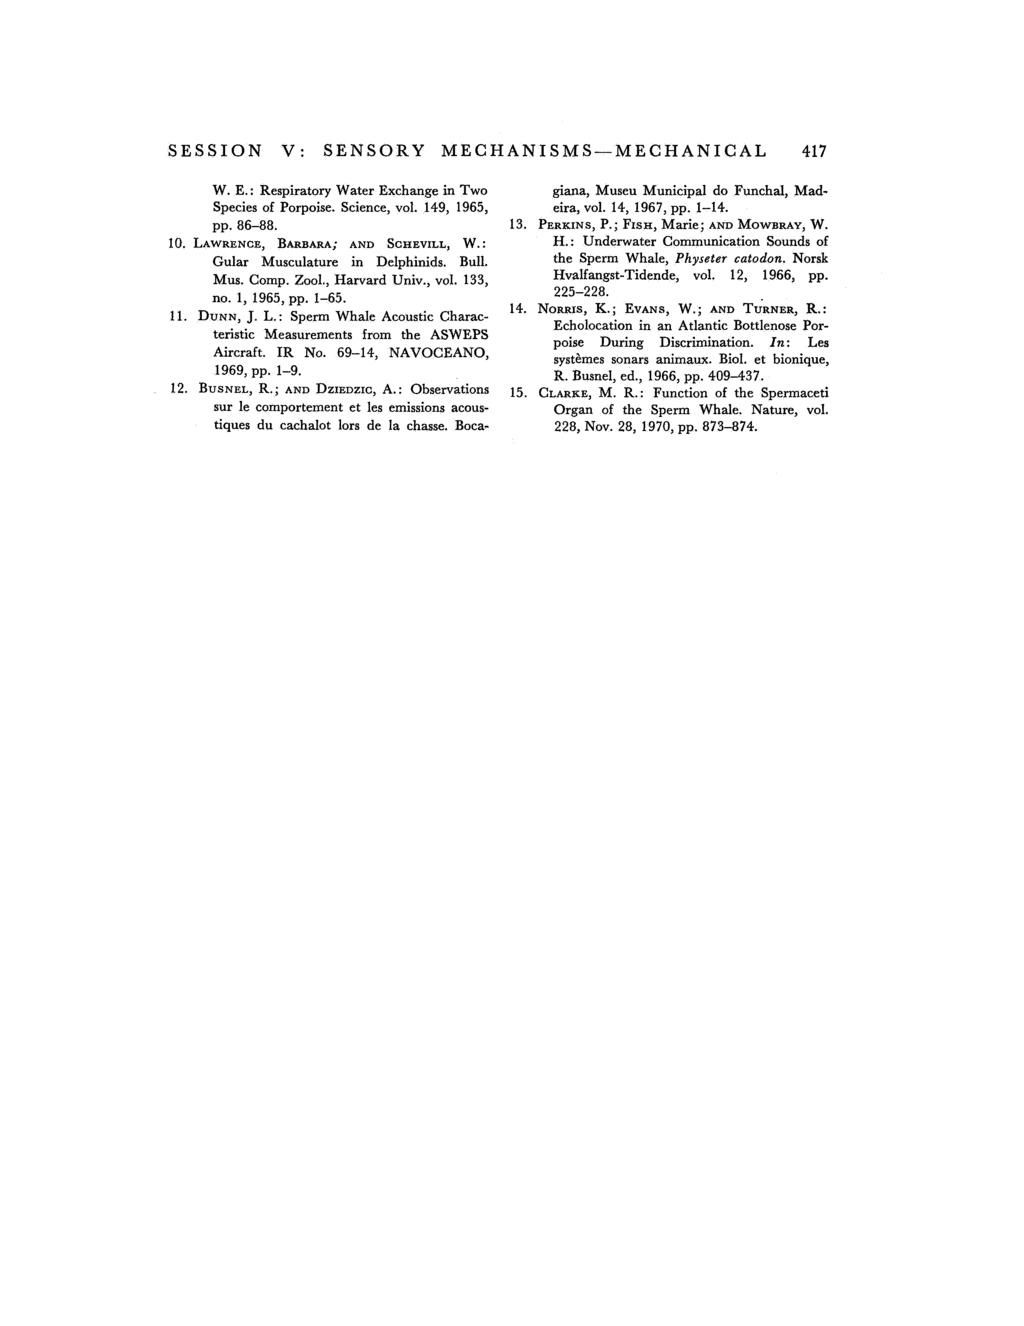 SESSION V: SENSORY MECHANISMS-MECHANICAL 417 W. E.: Respiratory Water Exchange in Two Species of Porpoise. Science, vol. 149, 1965, pp. 86-88. 10. LAWRENCE, BARBARA; AND SCHEVILL, W.